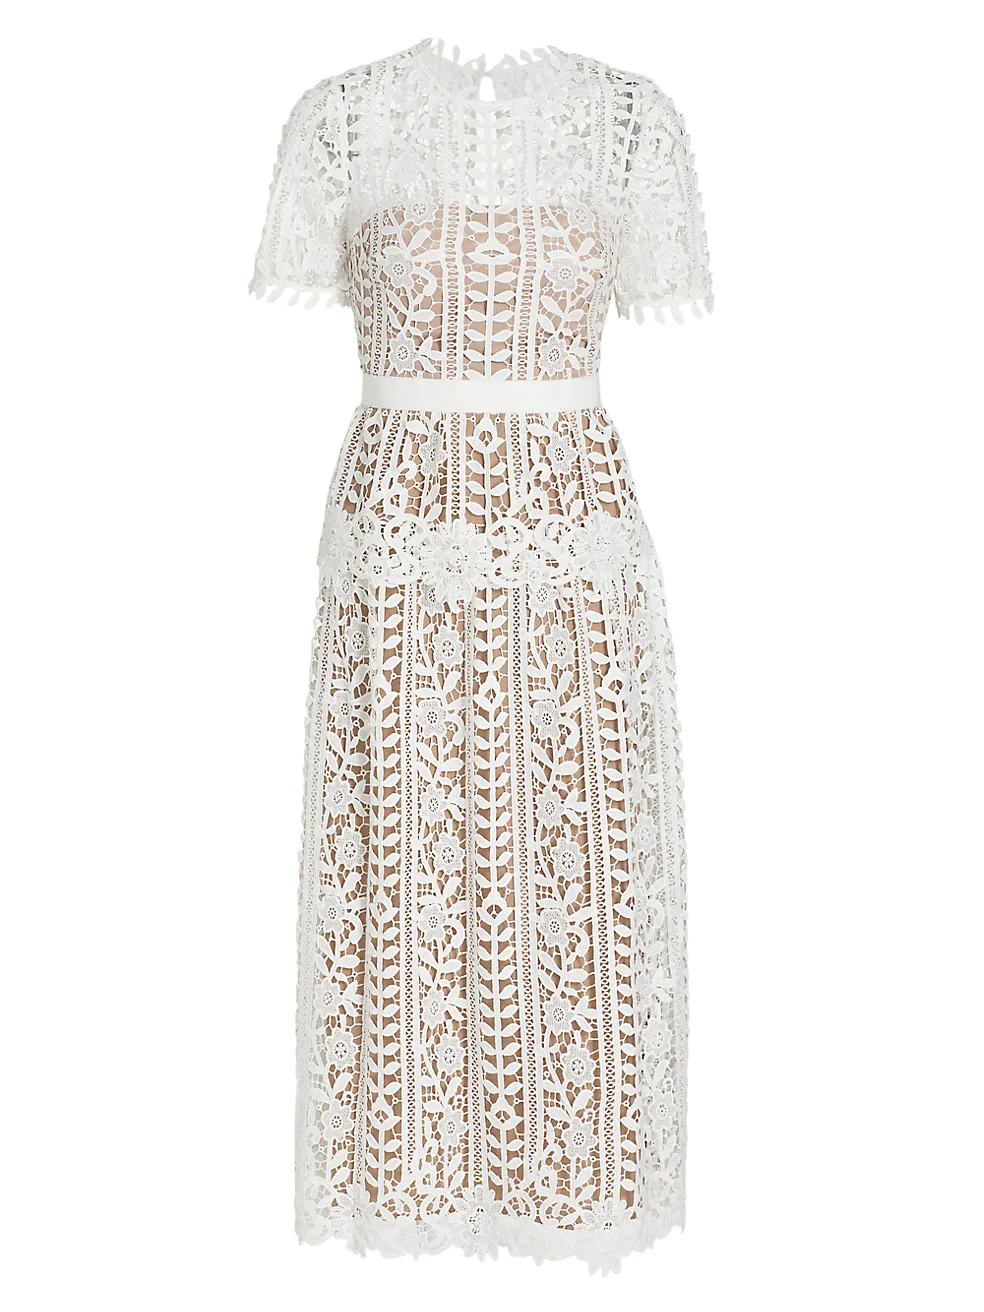 Lace Midi Dress from Self Portrait at Saks Fifth Avenue - white dress - white lace dress - fashion - spring dresses